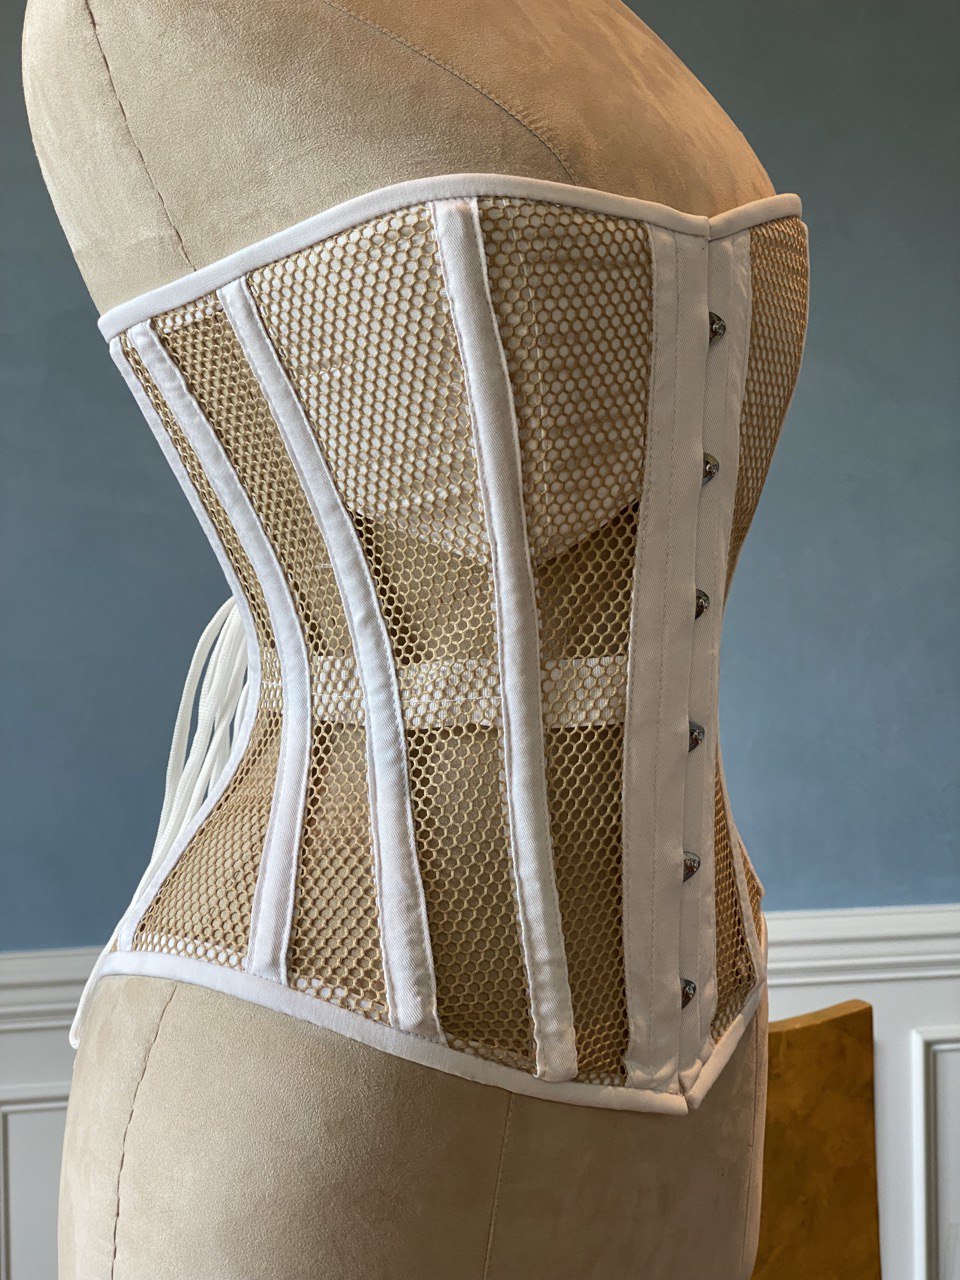 Overbust mesh authentic corset with leather bones and stripes